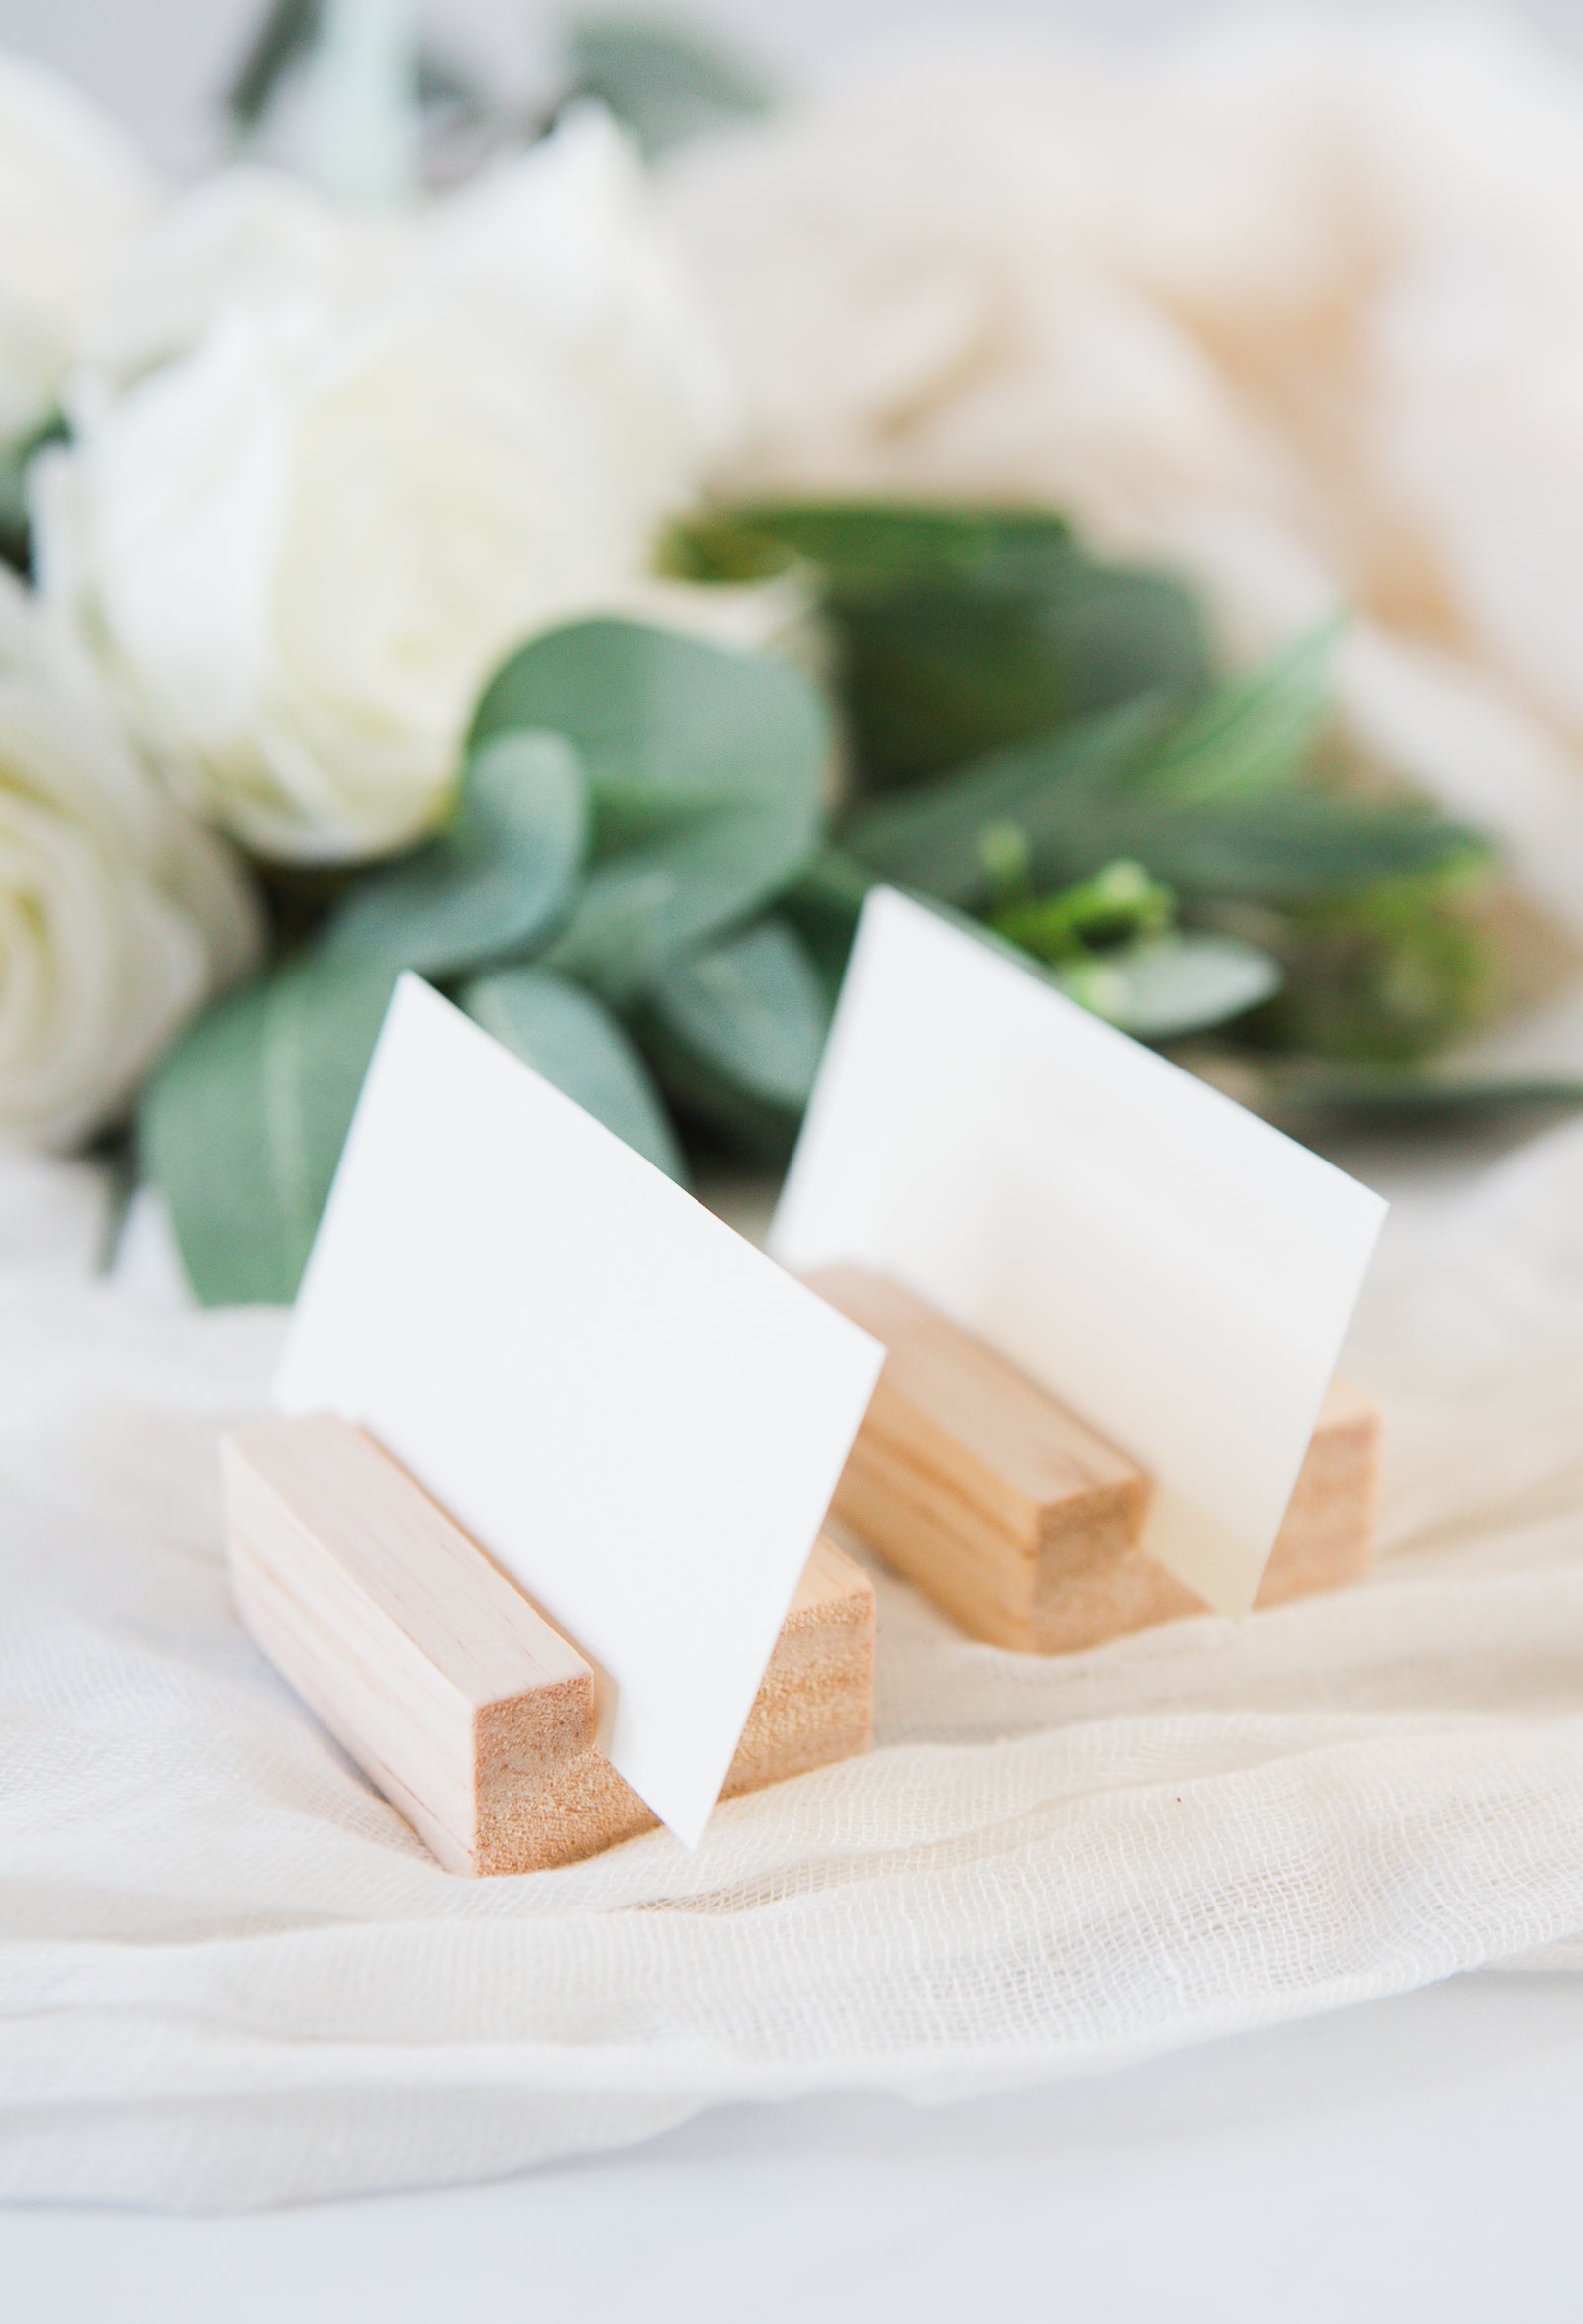 Wooden Place Card Holders - Wedding Decor Gifts